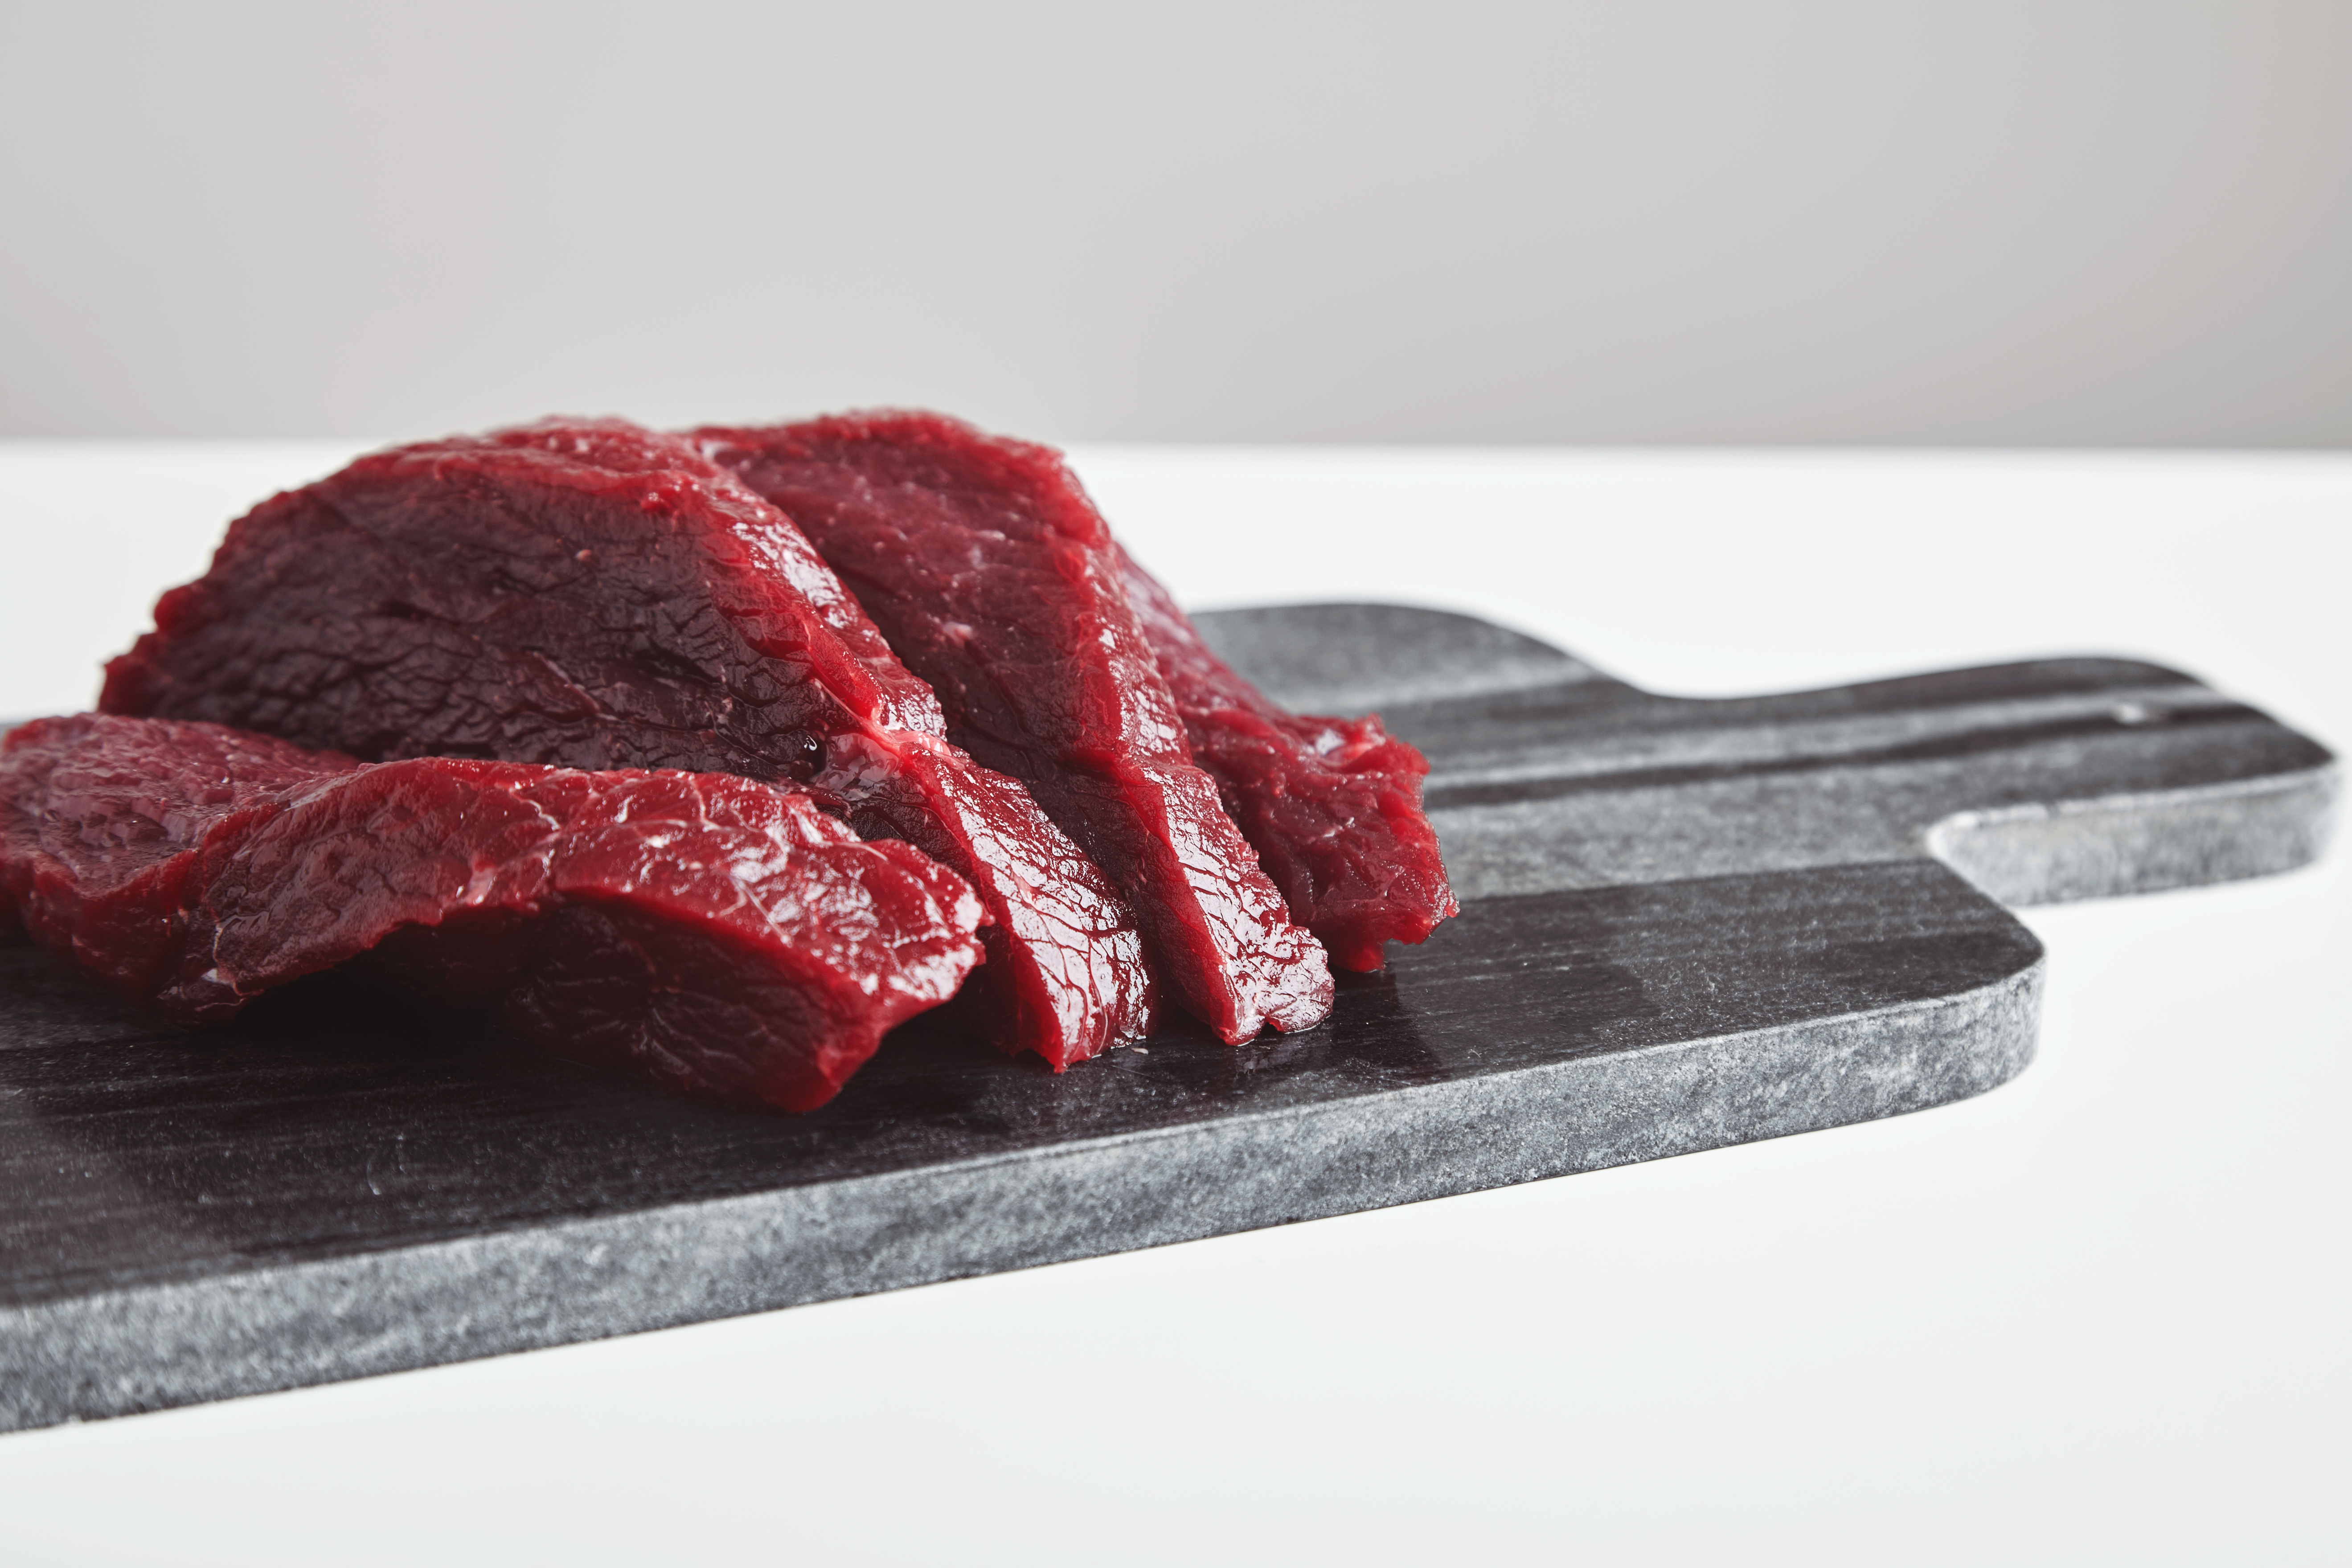 sliced-premium-raw-whale-meat-steak-marble-stone-cutting-board-isolated-white-table1